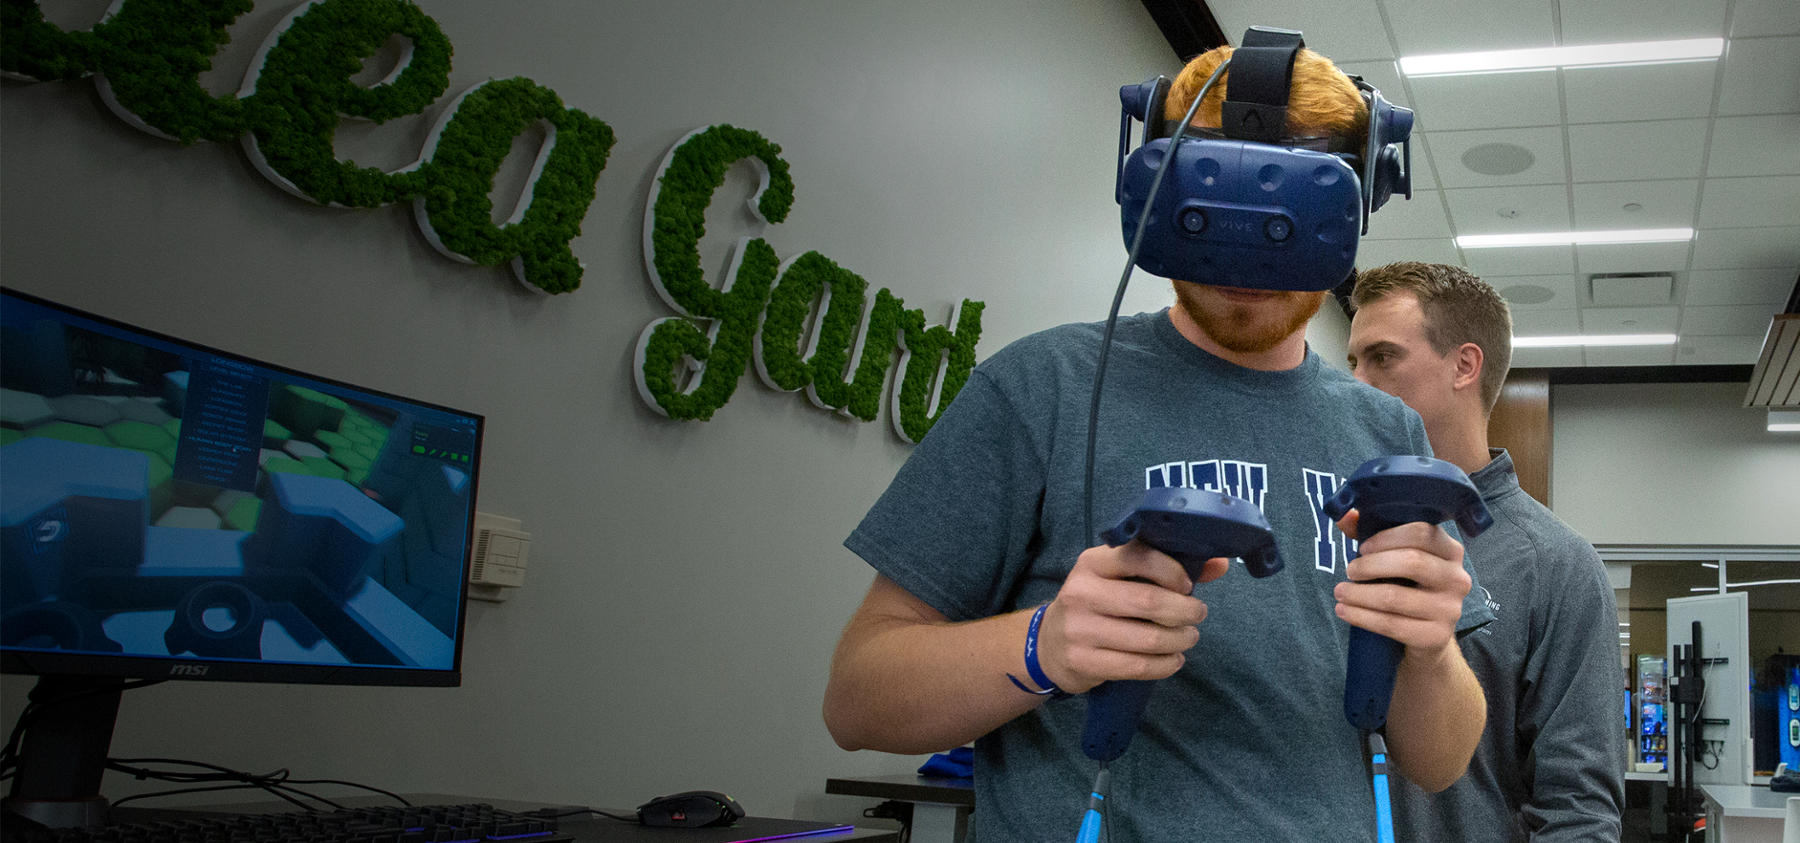 A person wearing a VR headset and interacting with a game at the Idea Garden